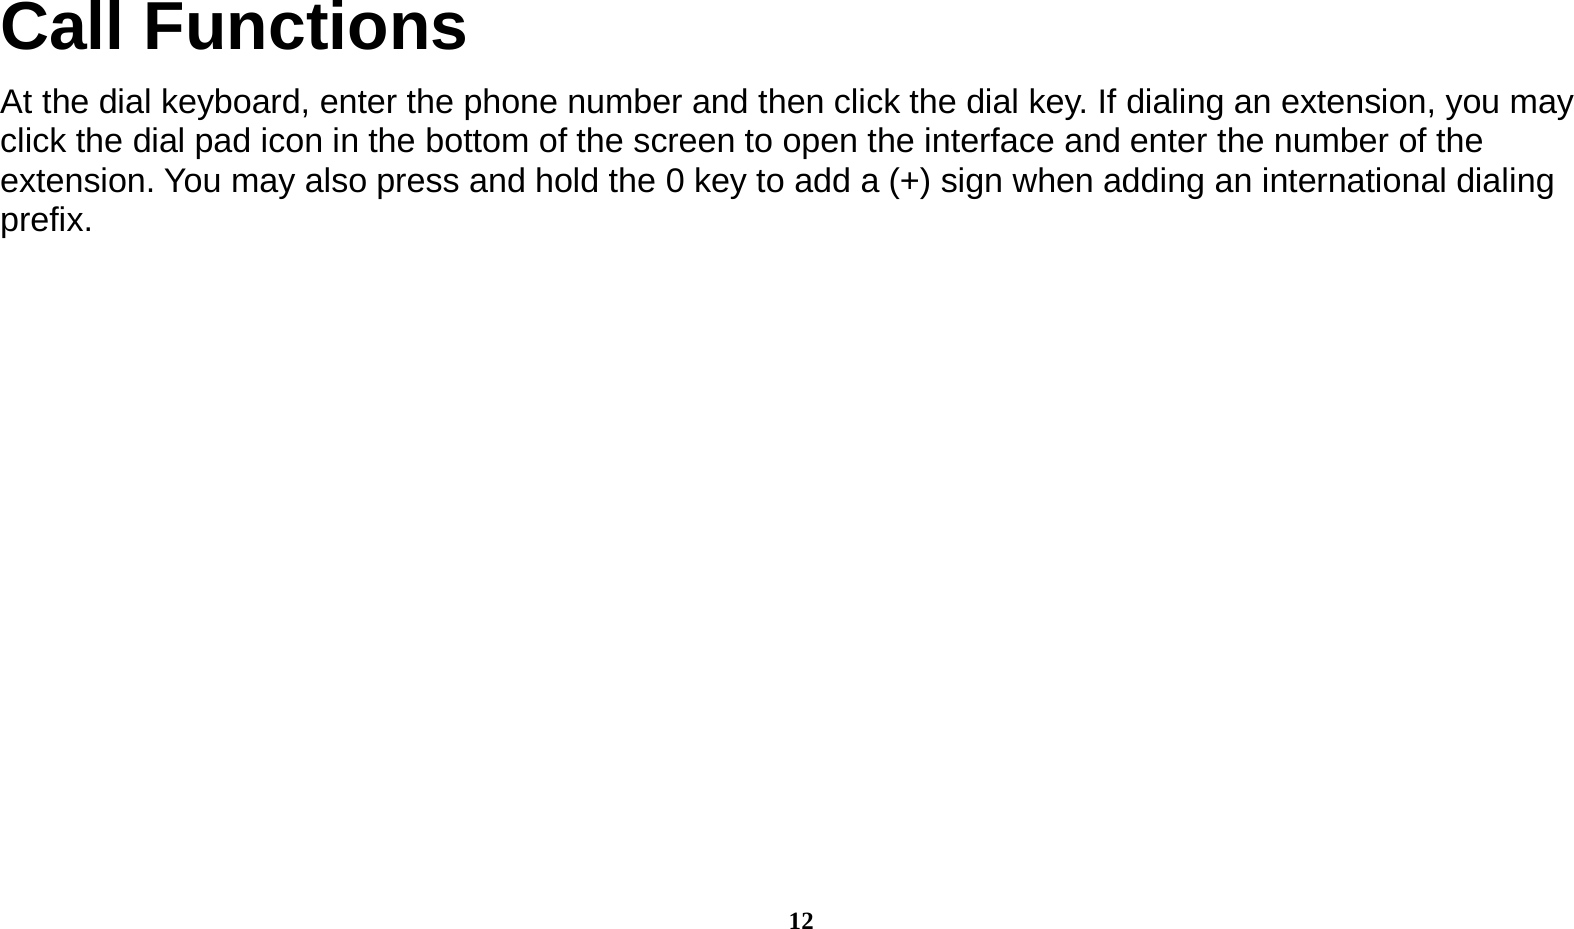  12 Call Functions                                    At the dial keyboard, enter the phone number and then click the dial key. If dialing an extension, you may click the dial pad icon in the bottom of the screen to open the interface and enter the number of the extension. You may also press and hold the 0 key to add a (+) sign when adding an international dialing prefix.   